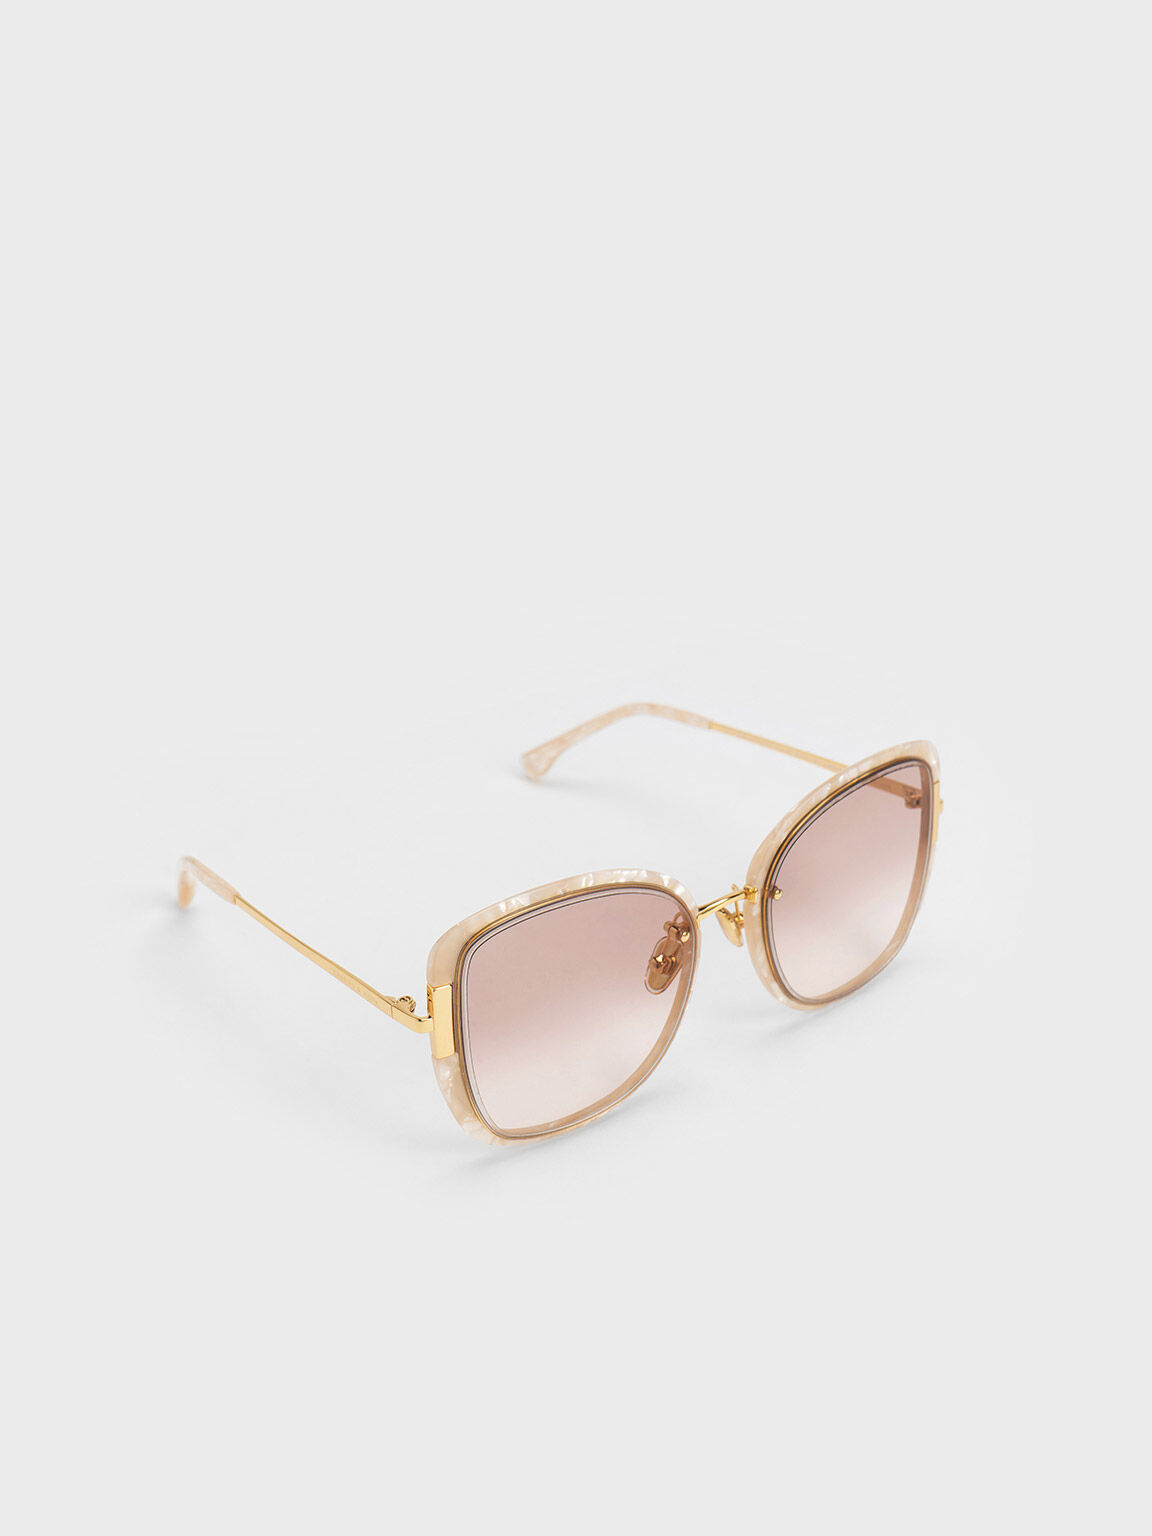 Acetate Butterfly Sunglasses, Peach, hi-res